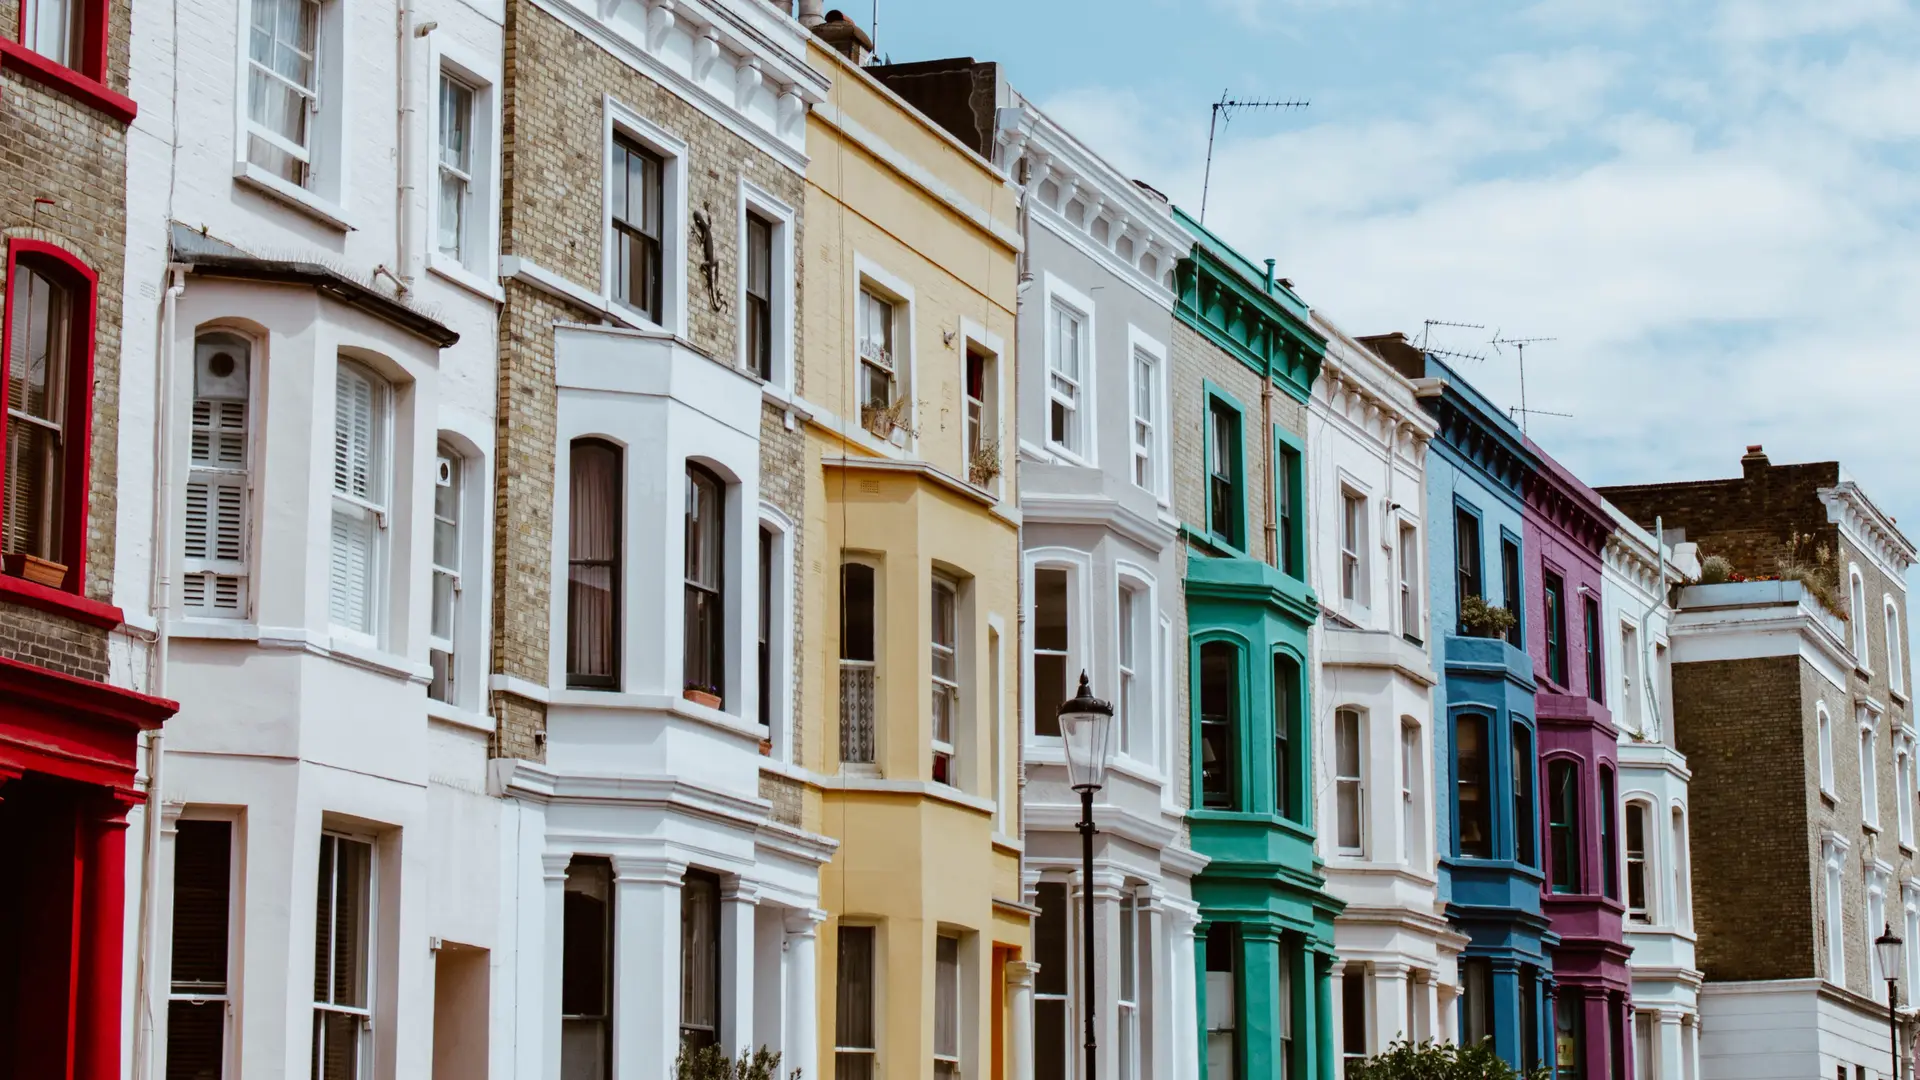 Portobello Road is of the best places to shop in london